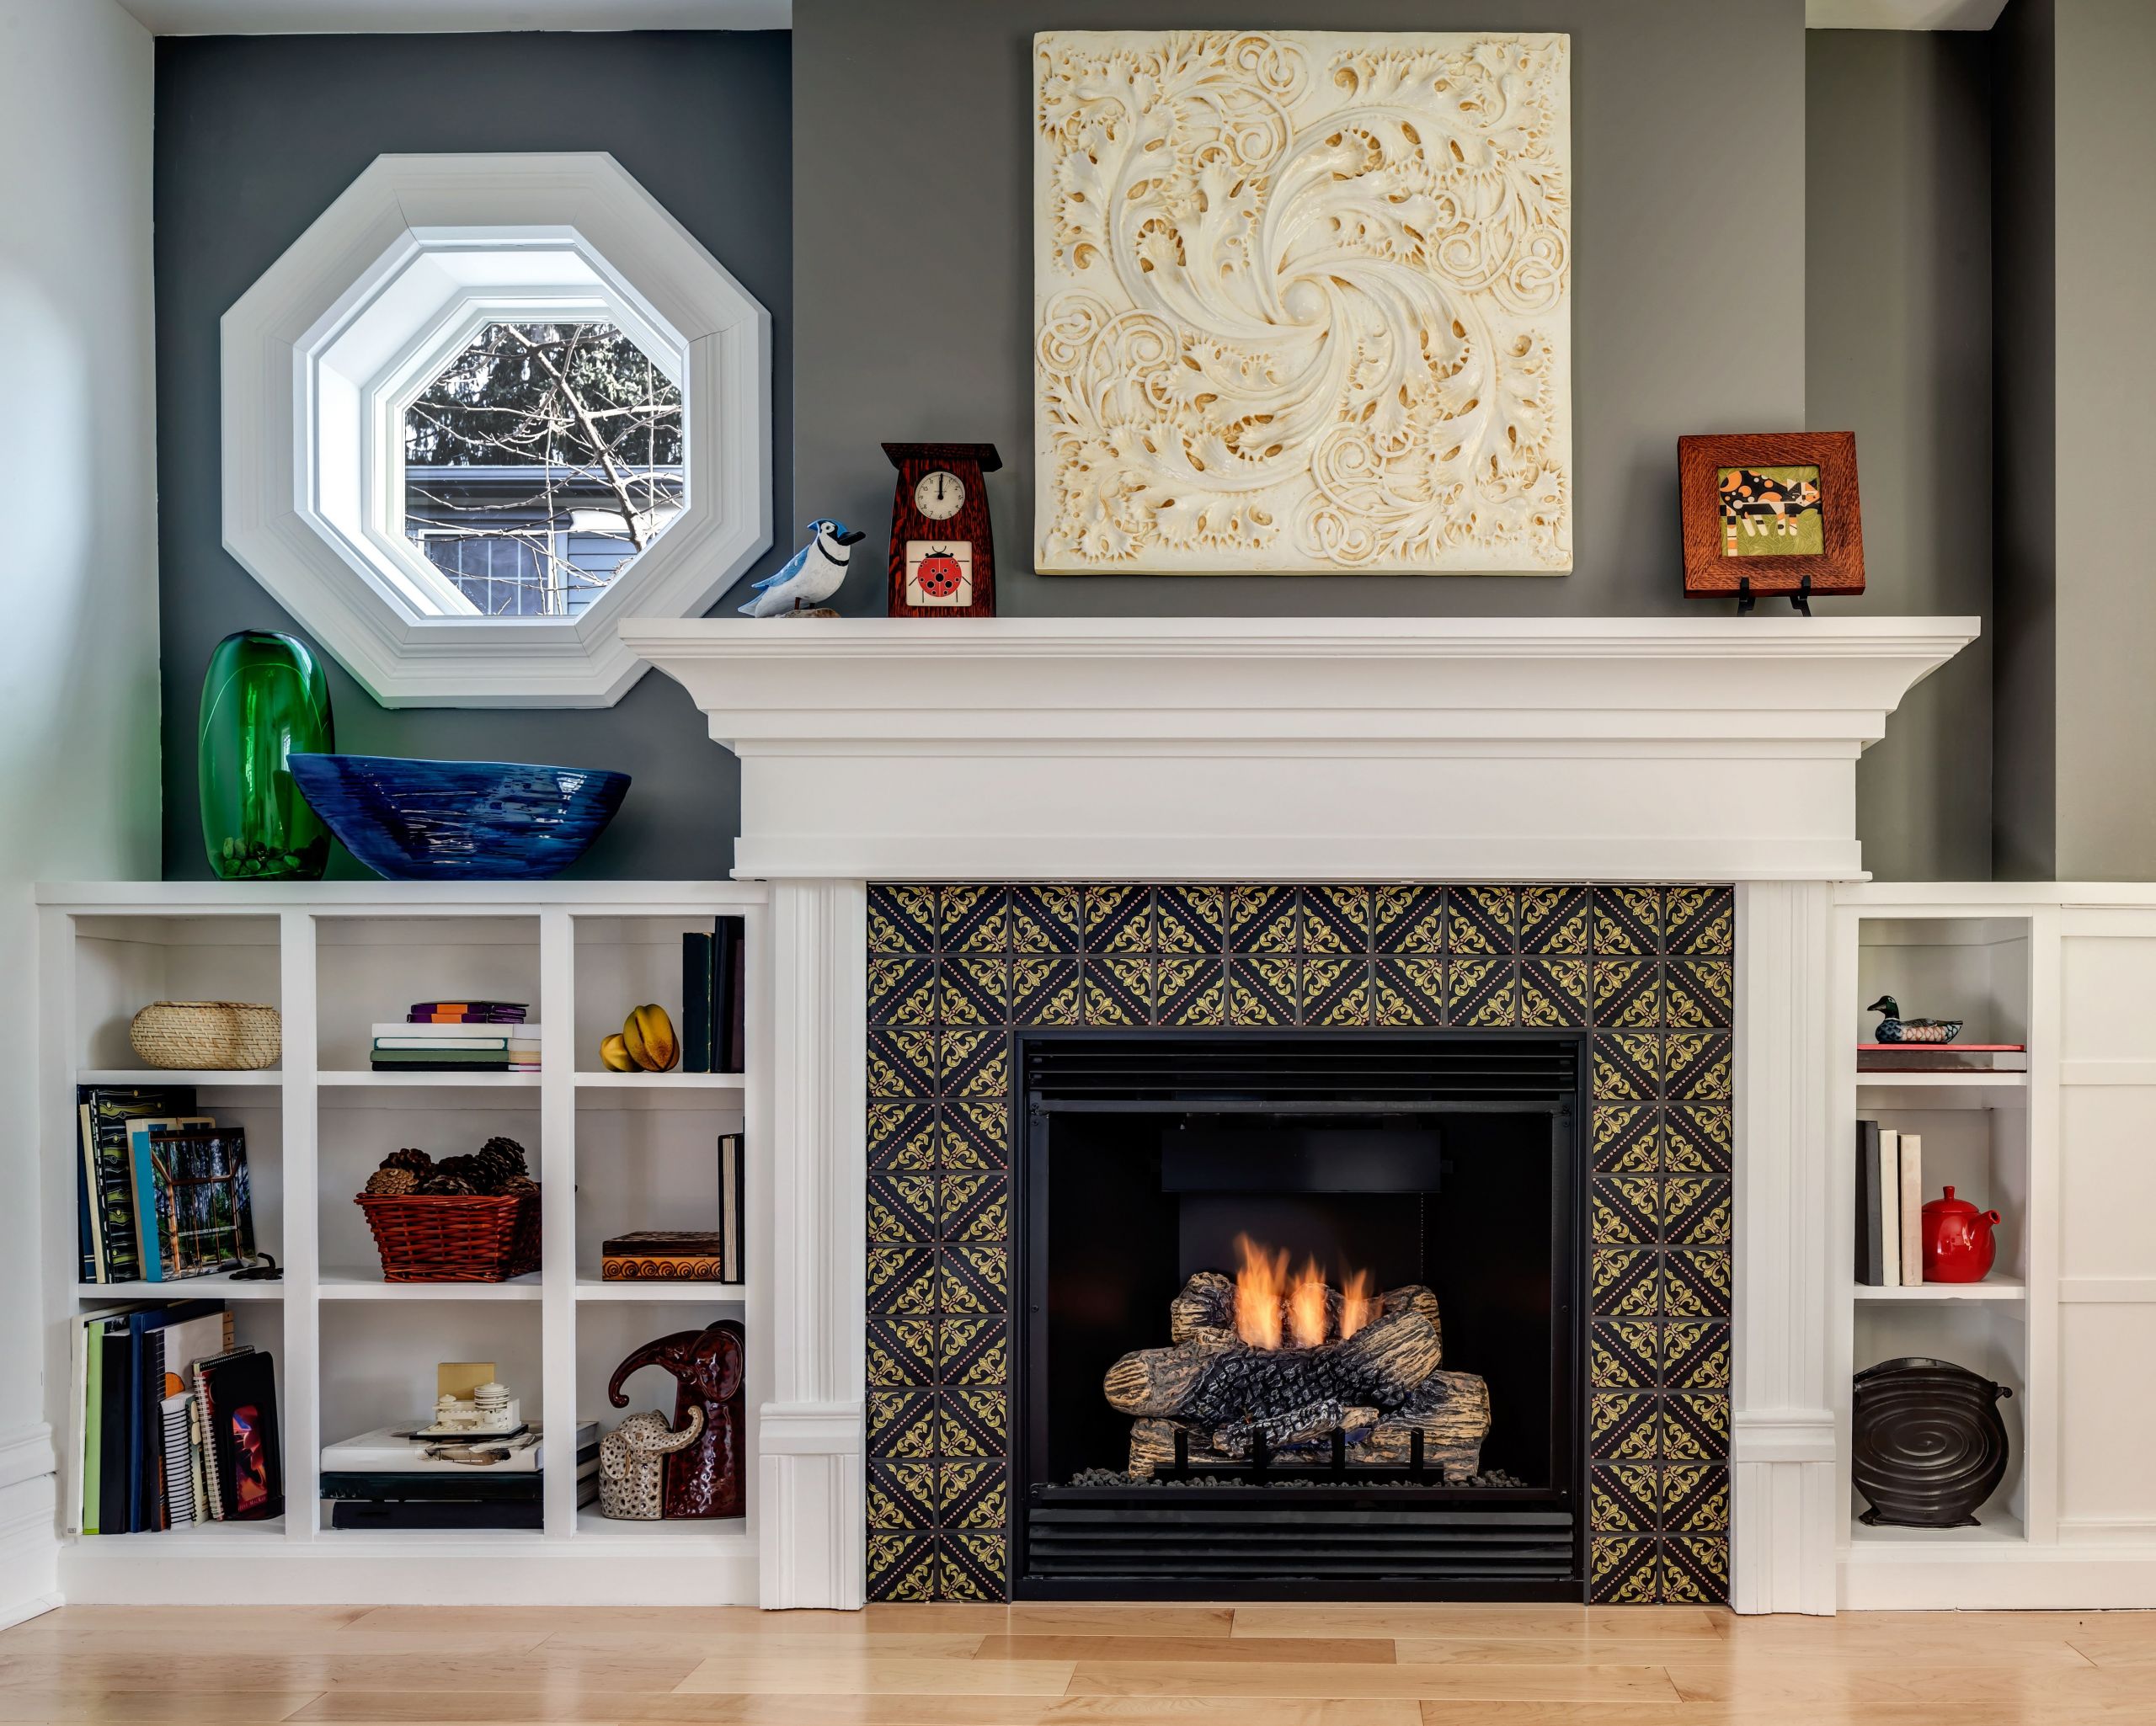 White Subway Tile Fireplace Inspirational This Small but Stylish Fireplace Features Our Lisbon Tile